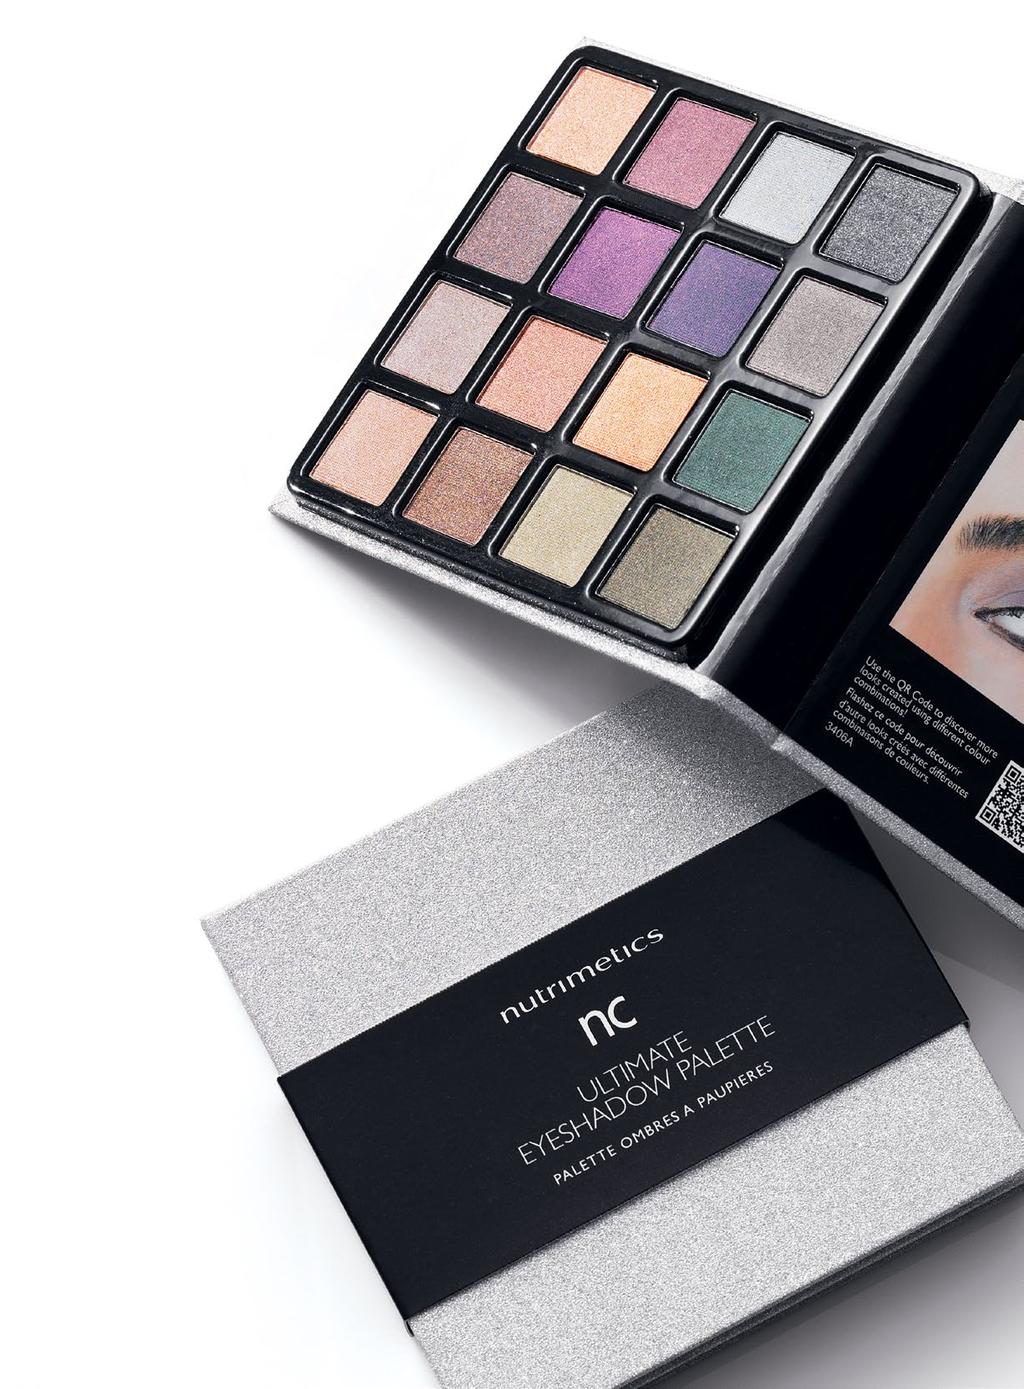 NEW Full Spectrum Eye Colour Our studio inspired eye palette contains 8 harmonious colour ways that offer you a complete eye-colour wardrobe.